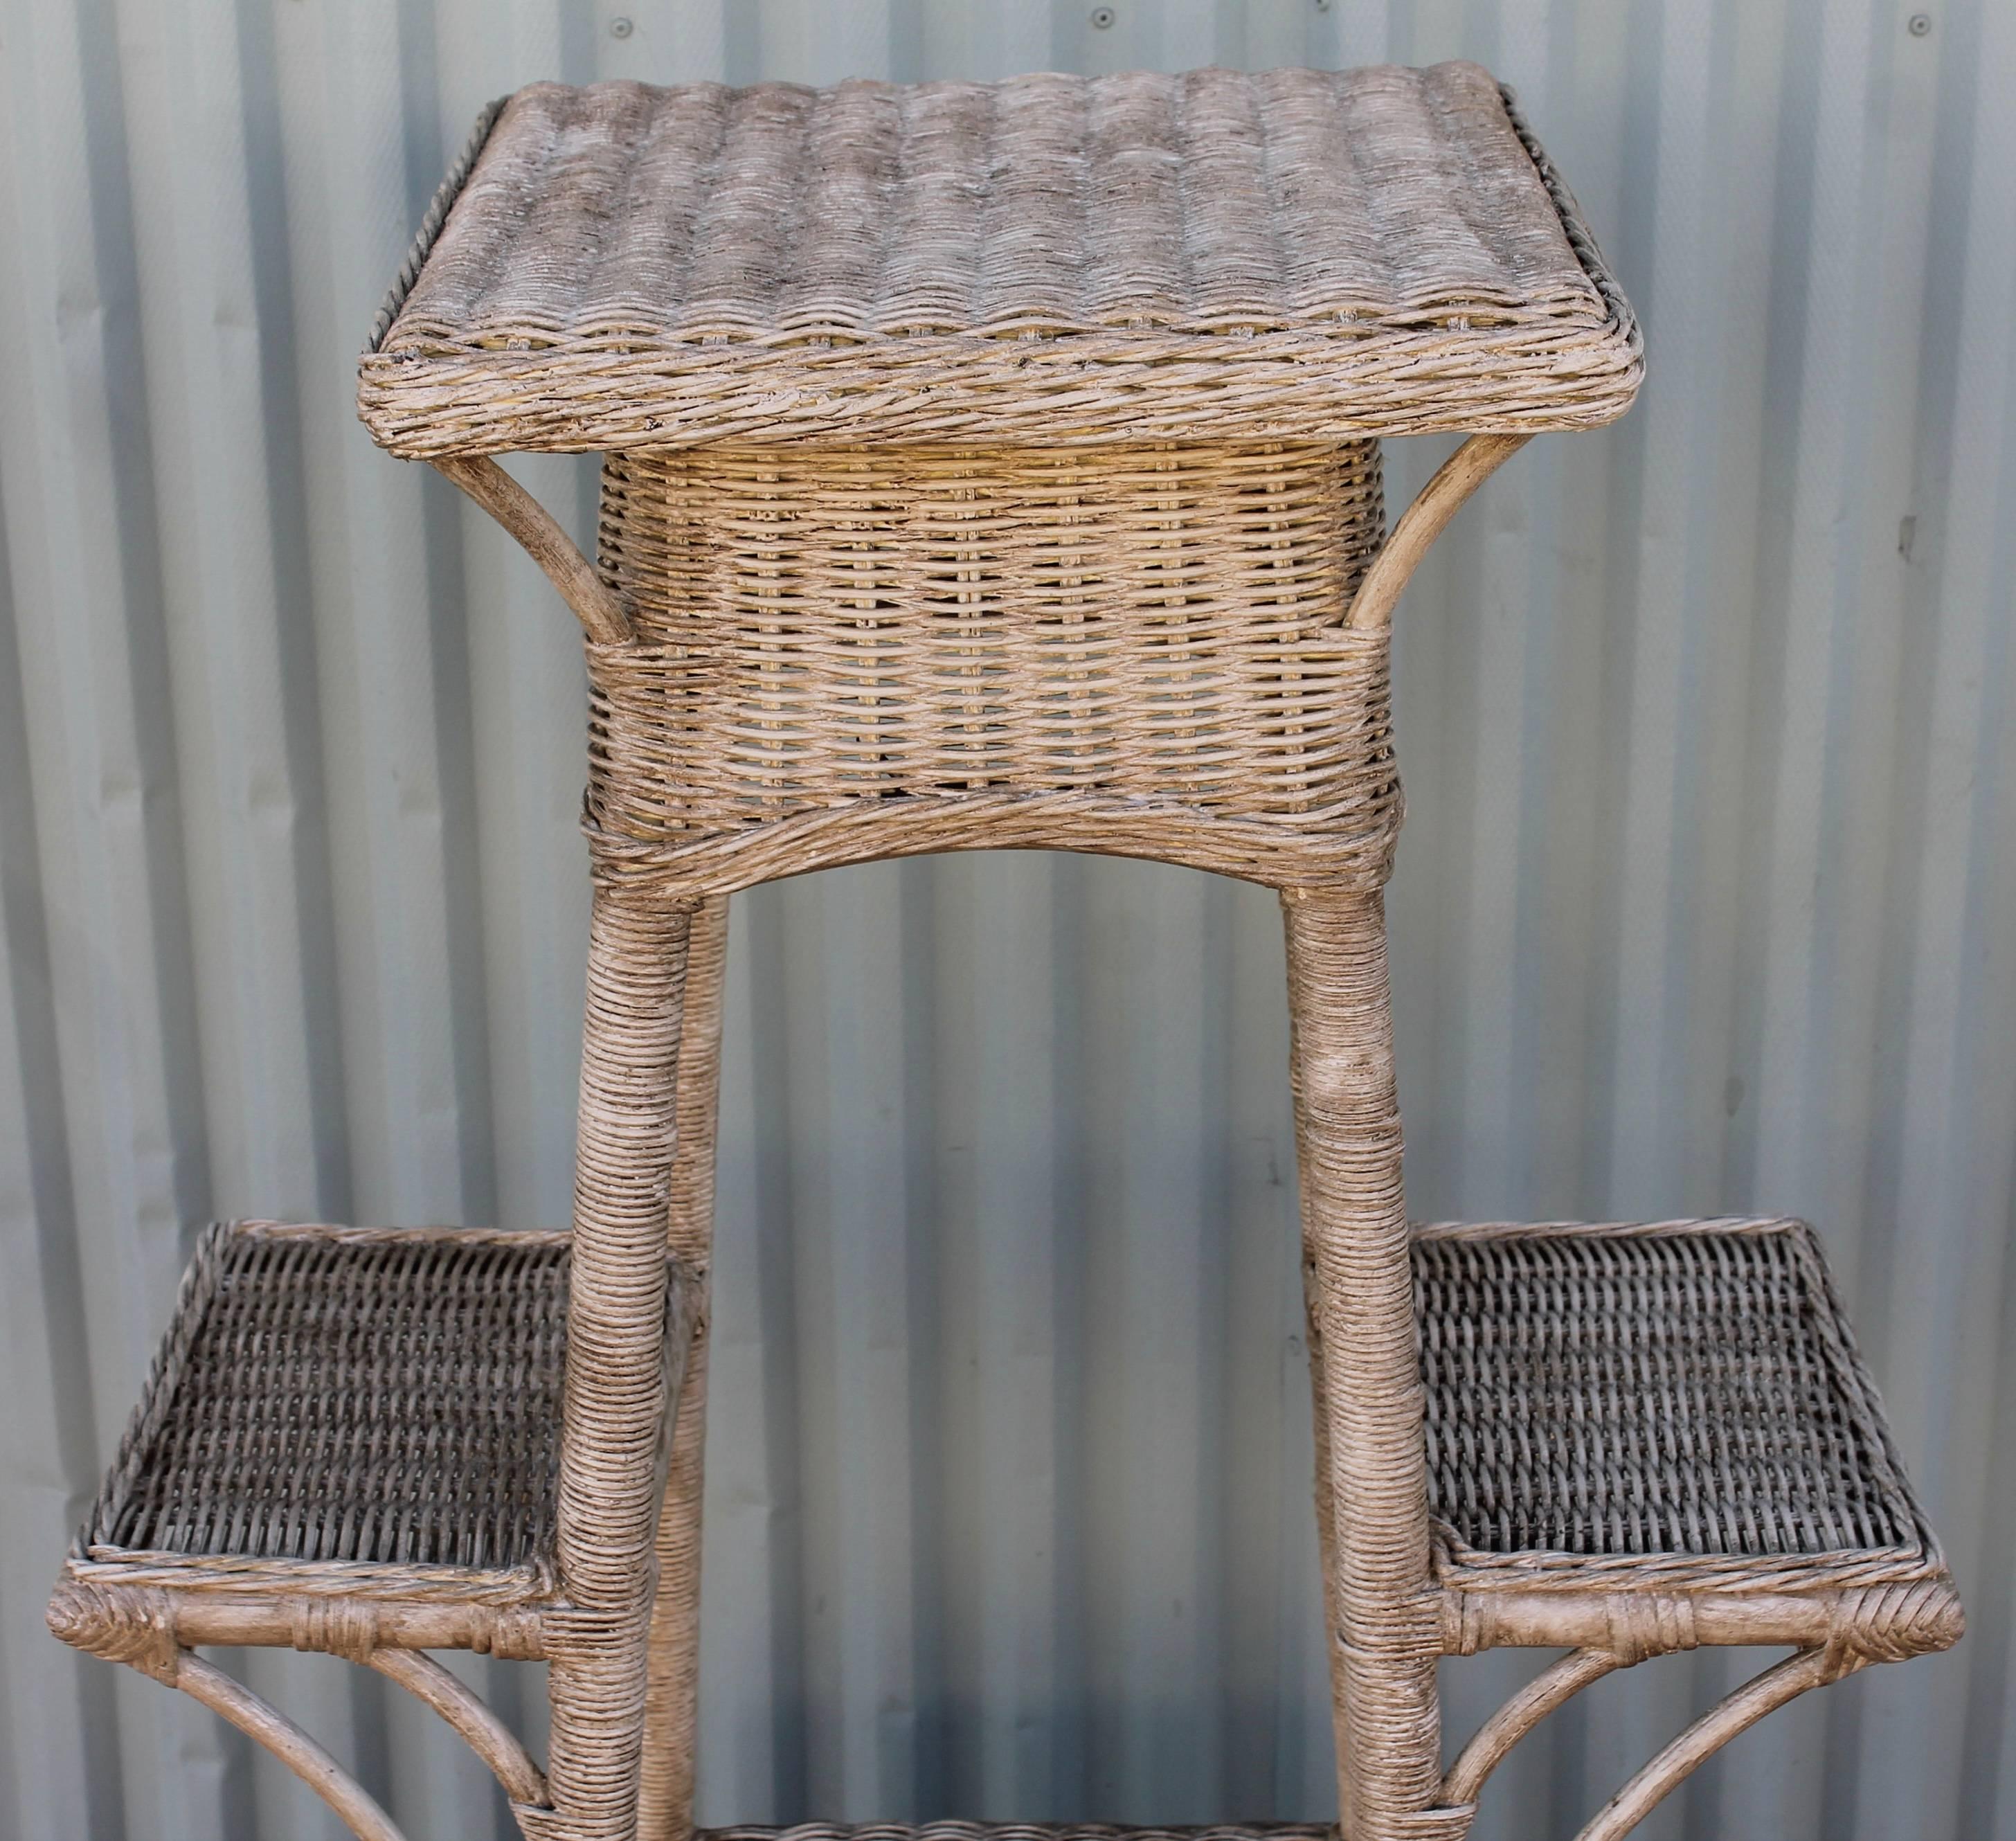 American Bar Harbor Country Wicker Plant Stand